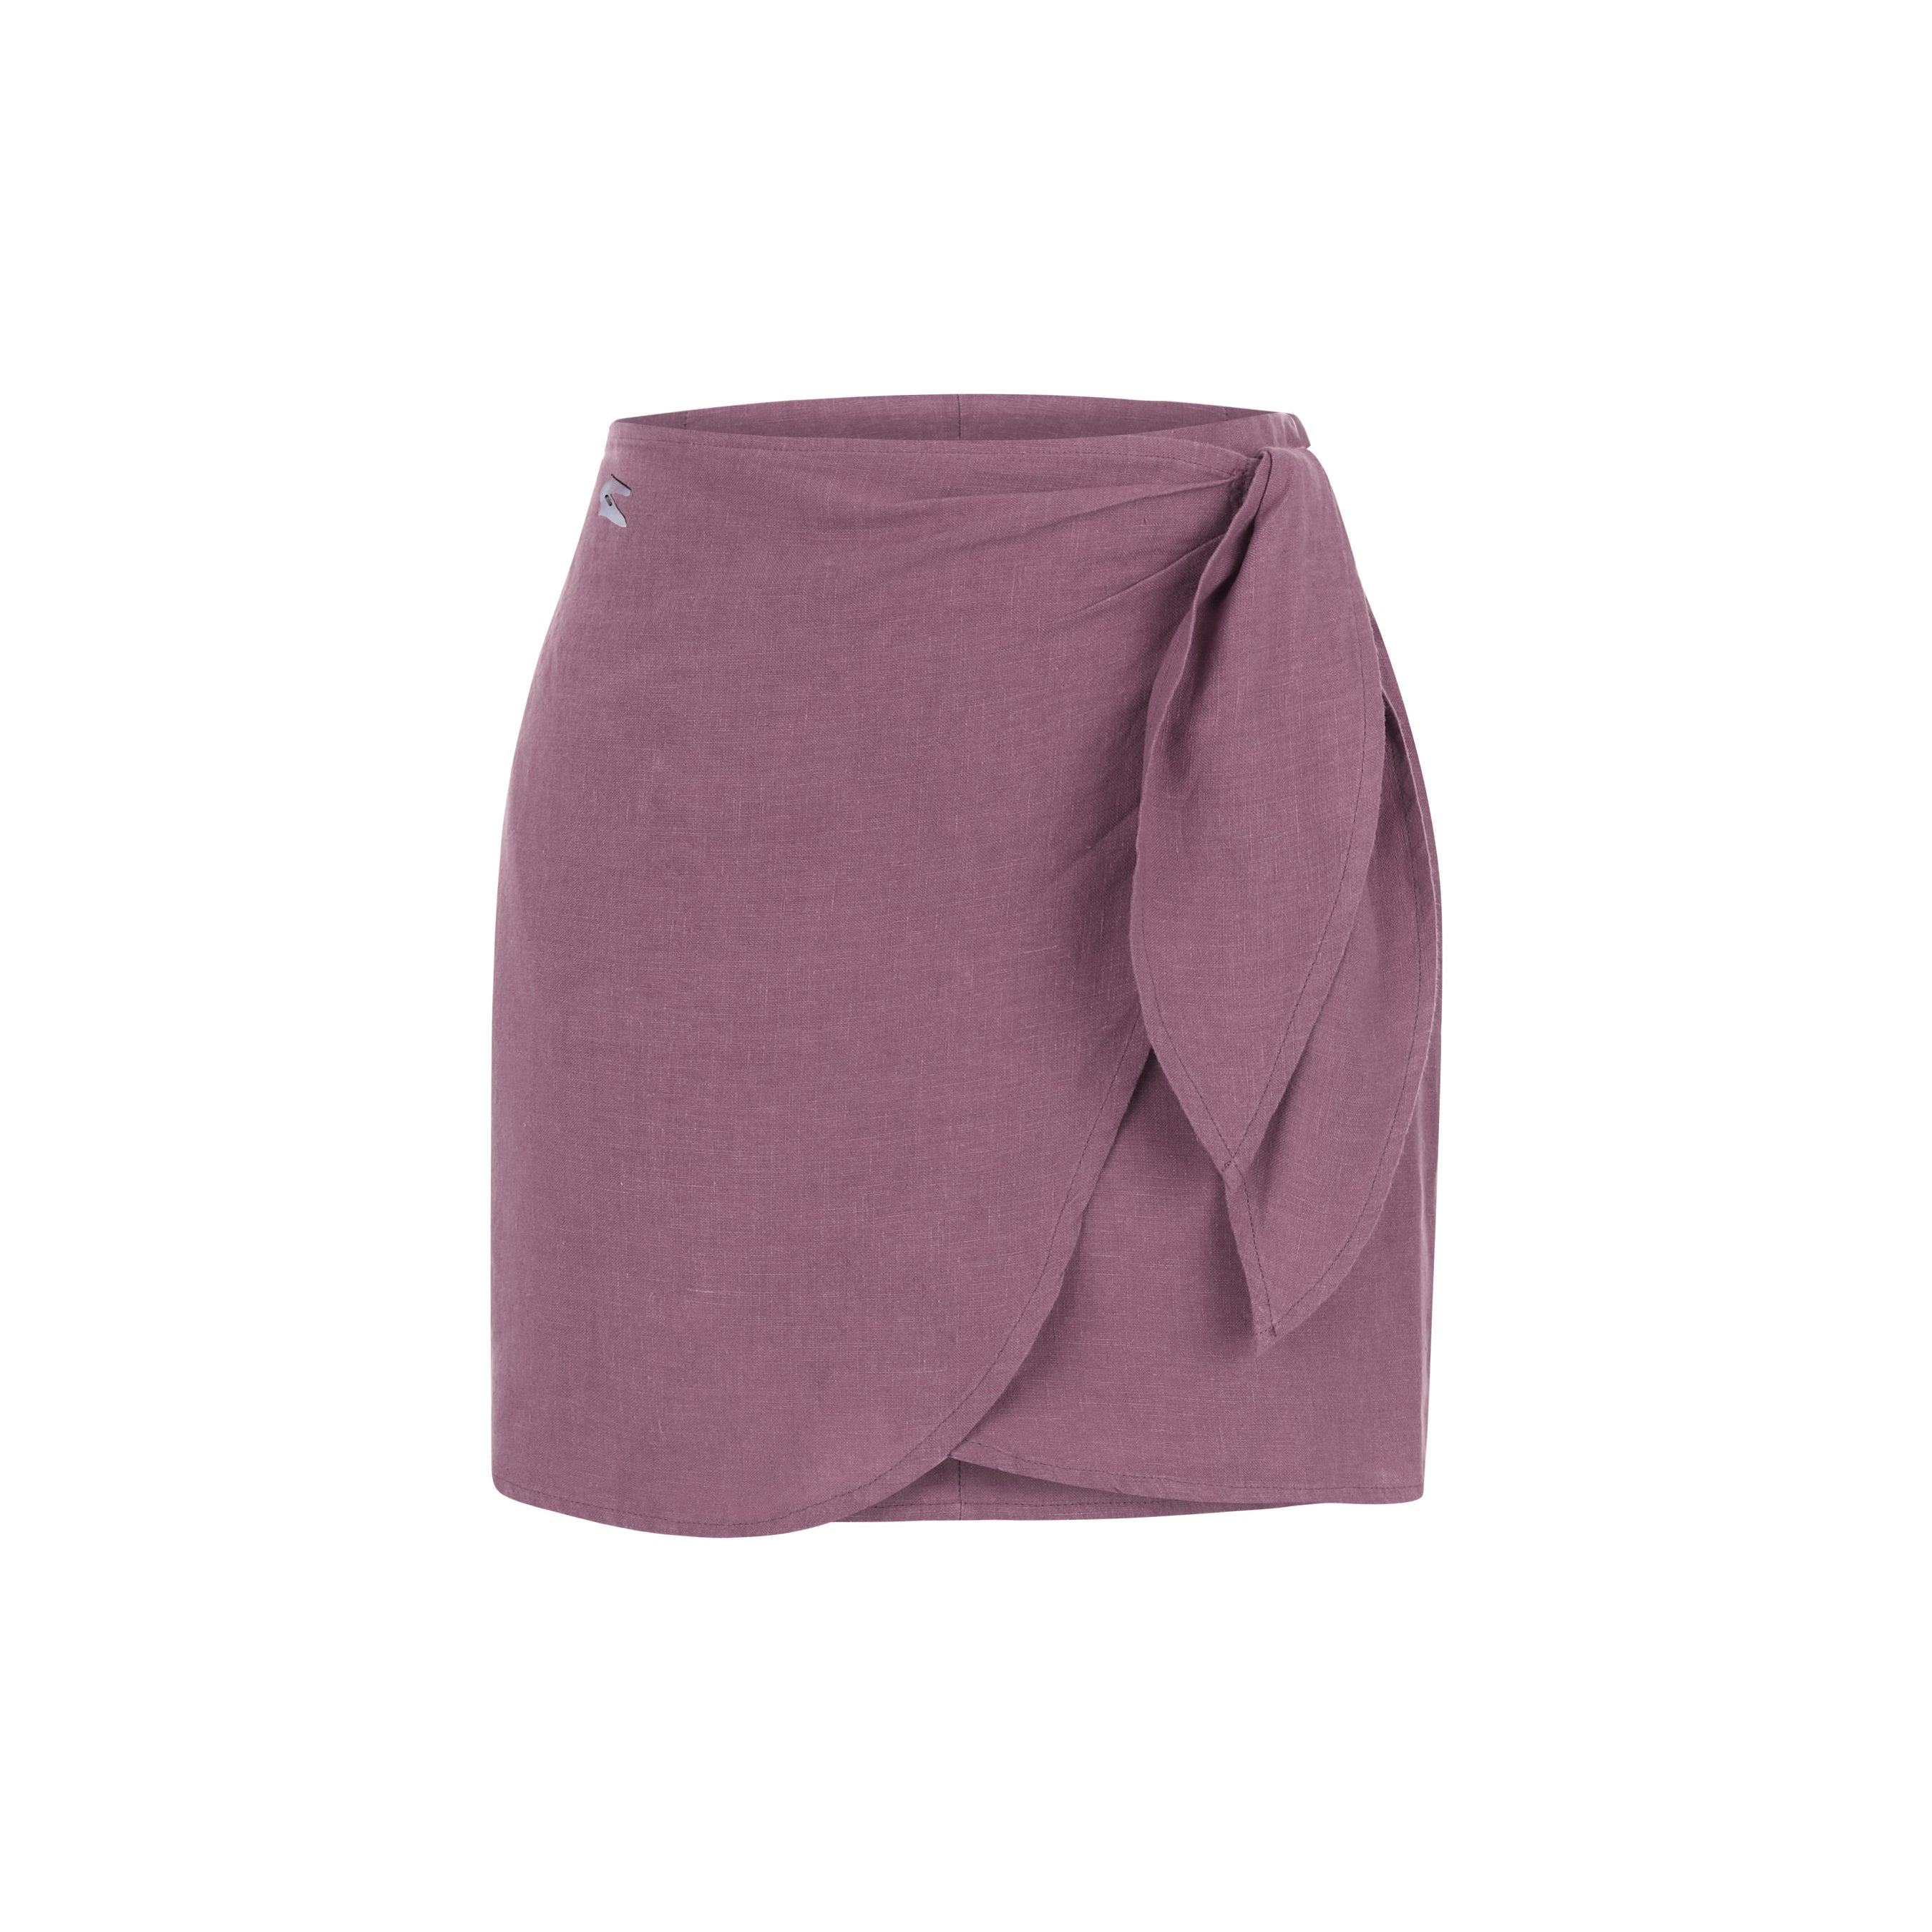 Cheese and Grapes Linen Skirt